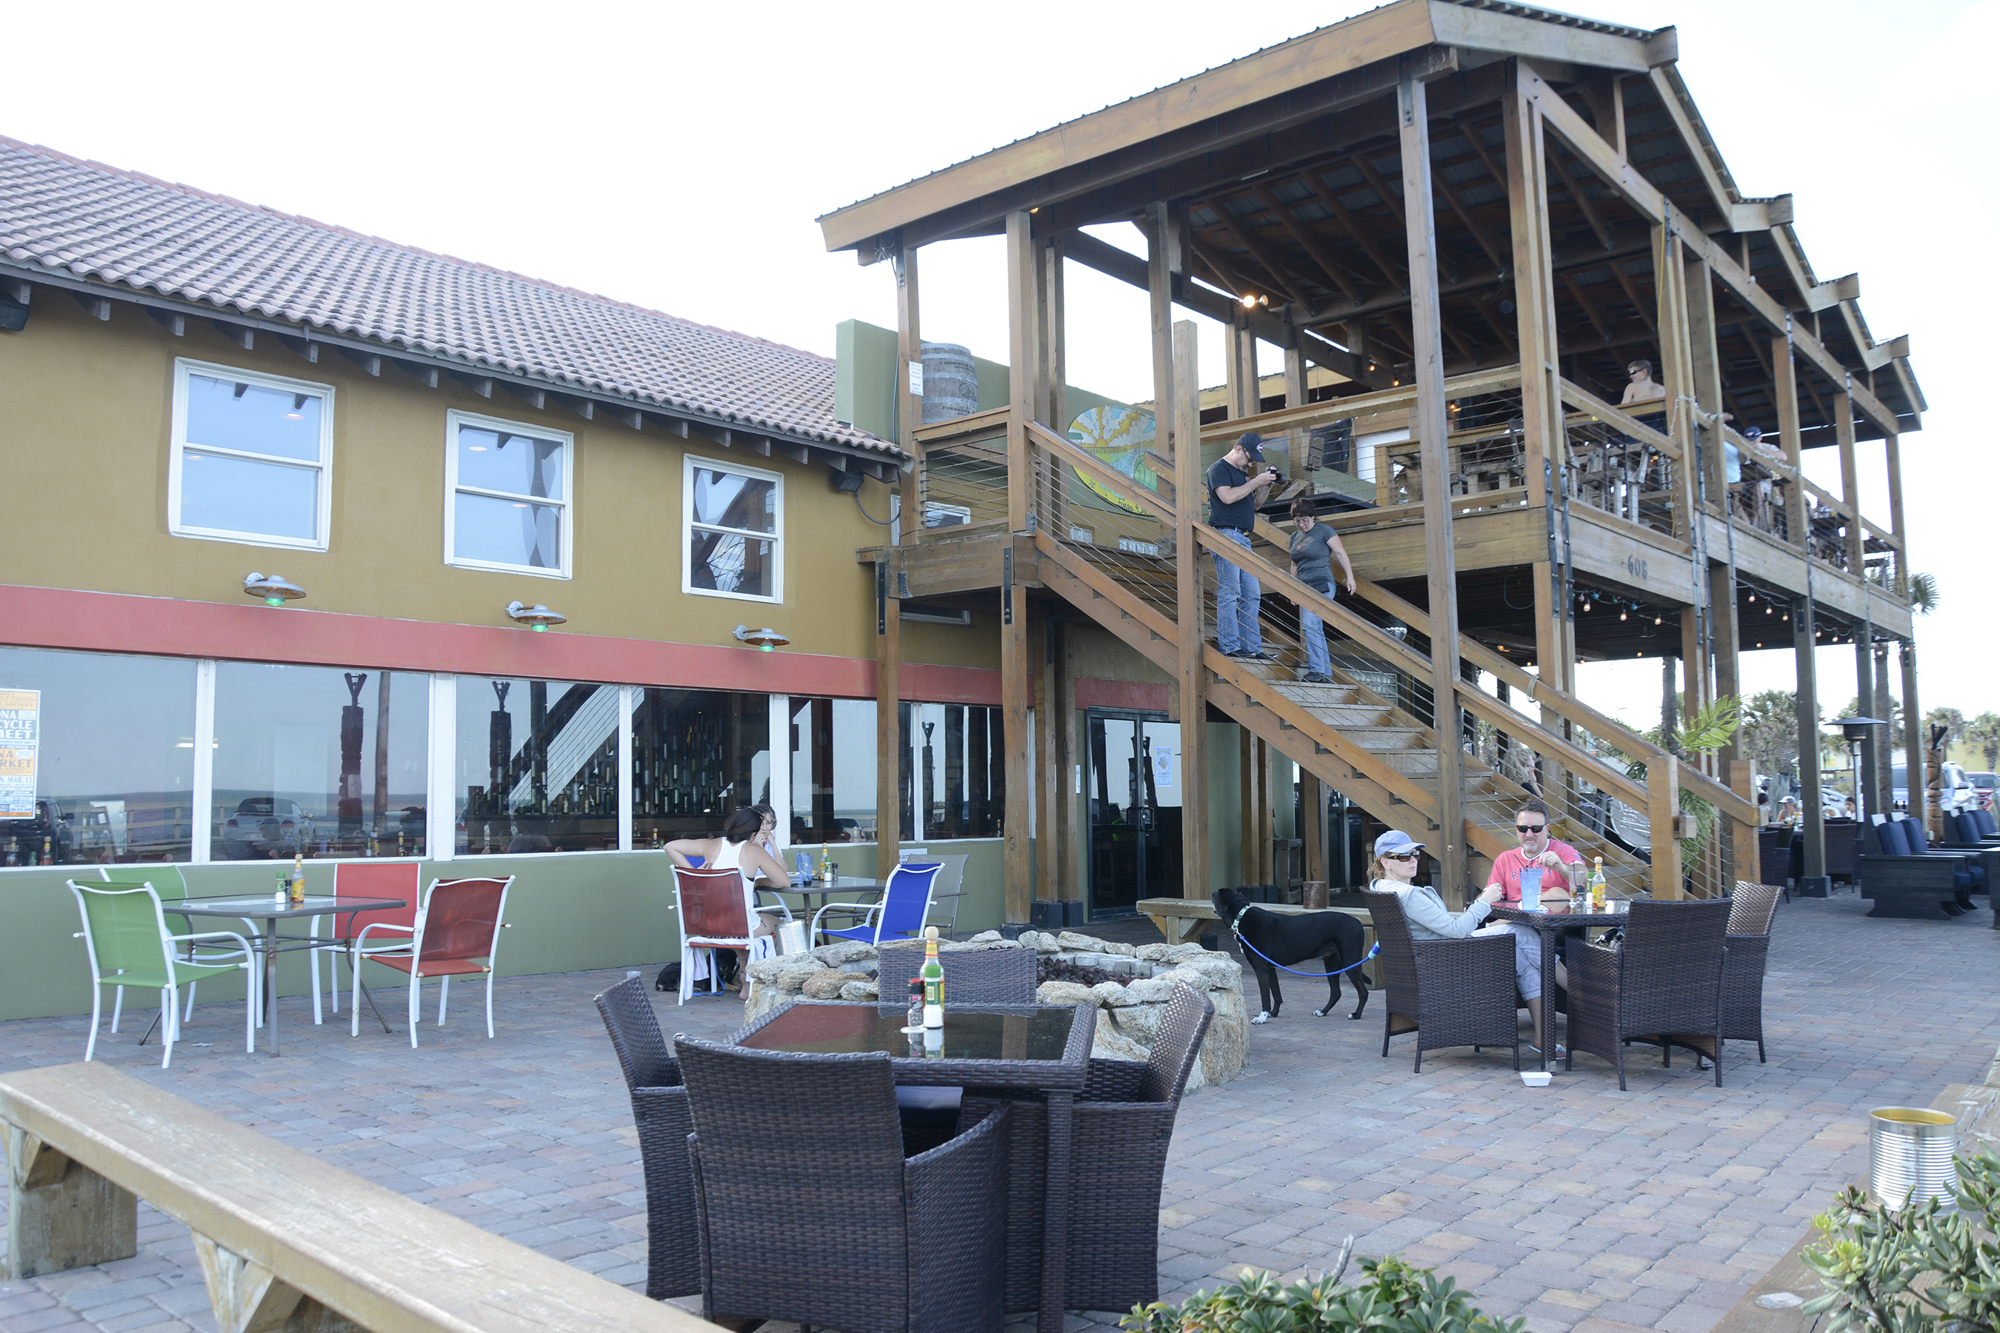 Tortugas will feature an all new VIP Lounge upstairs with TV's, couches and a fire table, while downstairs the bars will see a full makeover, five fire tables, new furniture and a full new menu.